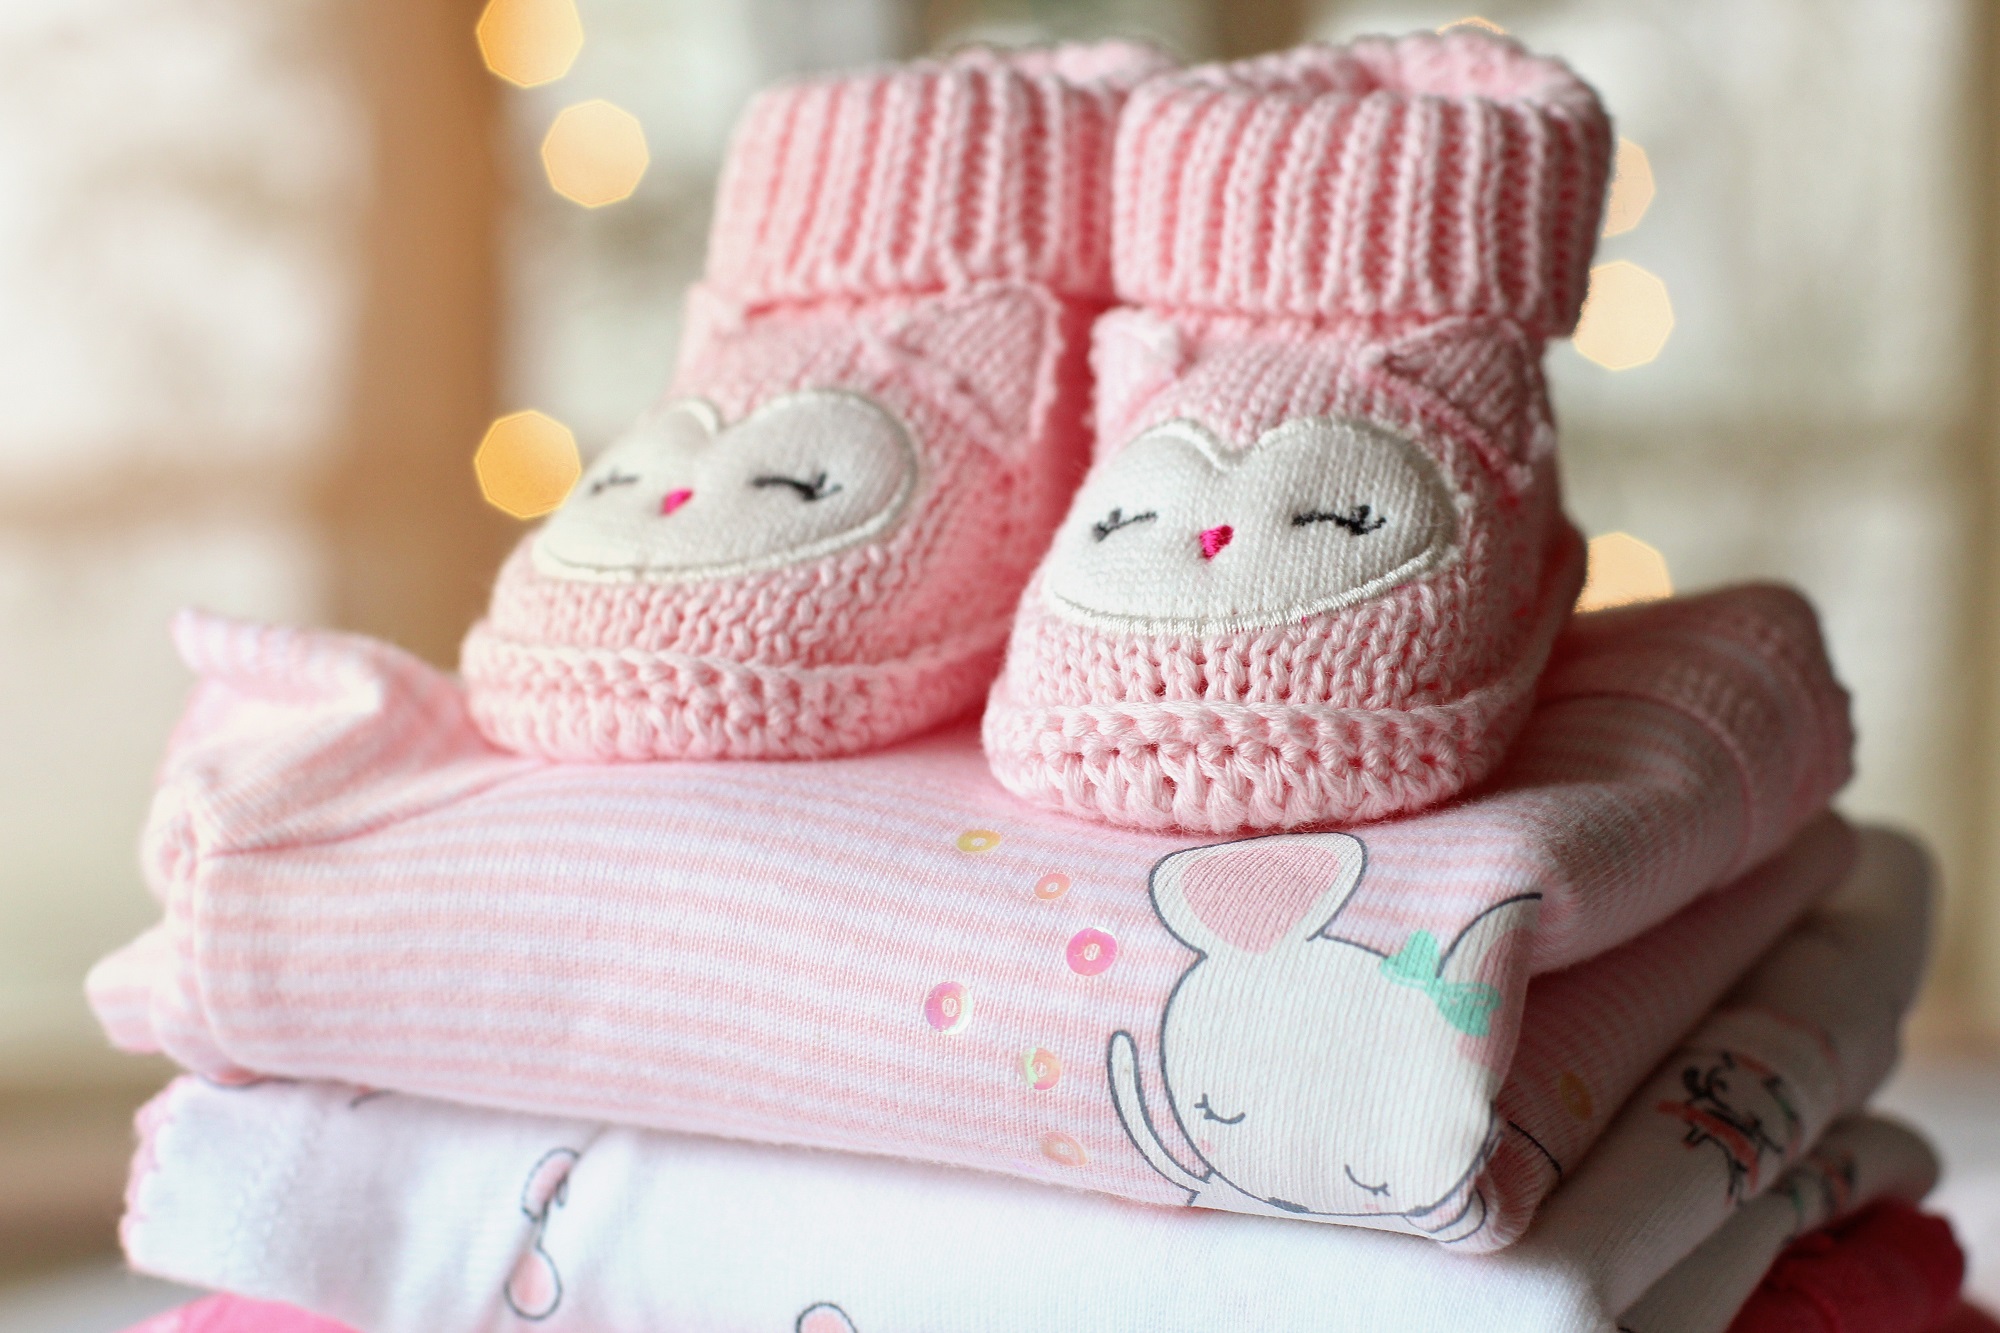 Donate Items for a Baby Layette for a New Mom - Hope Clinic For Women